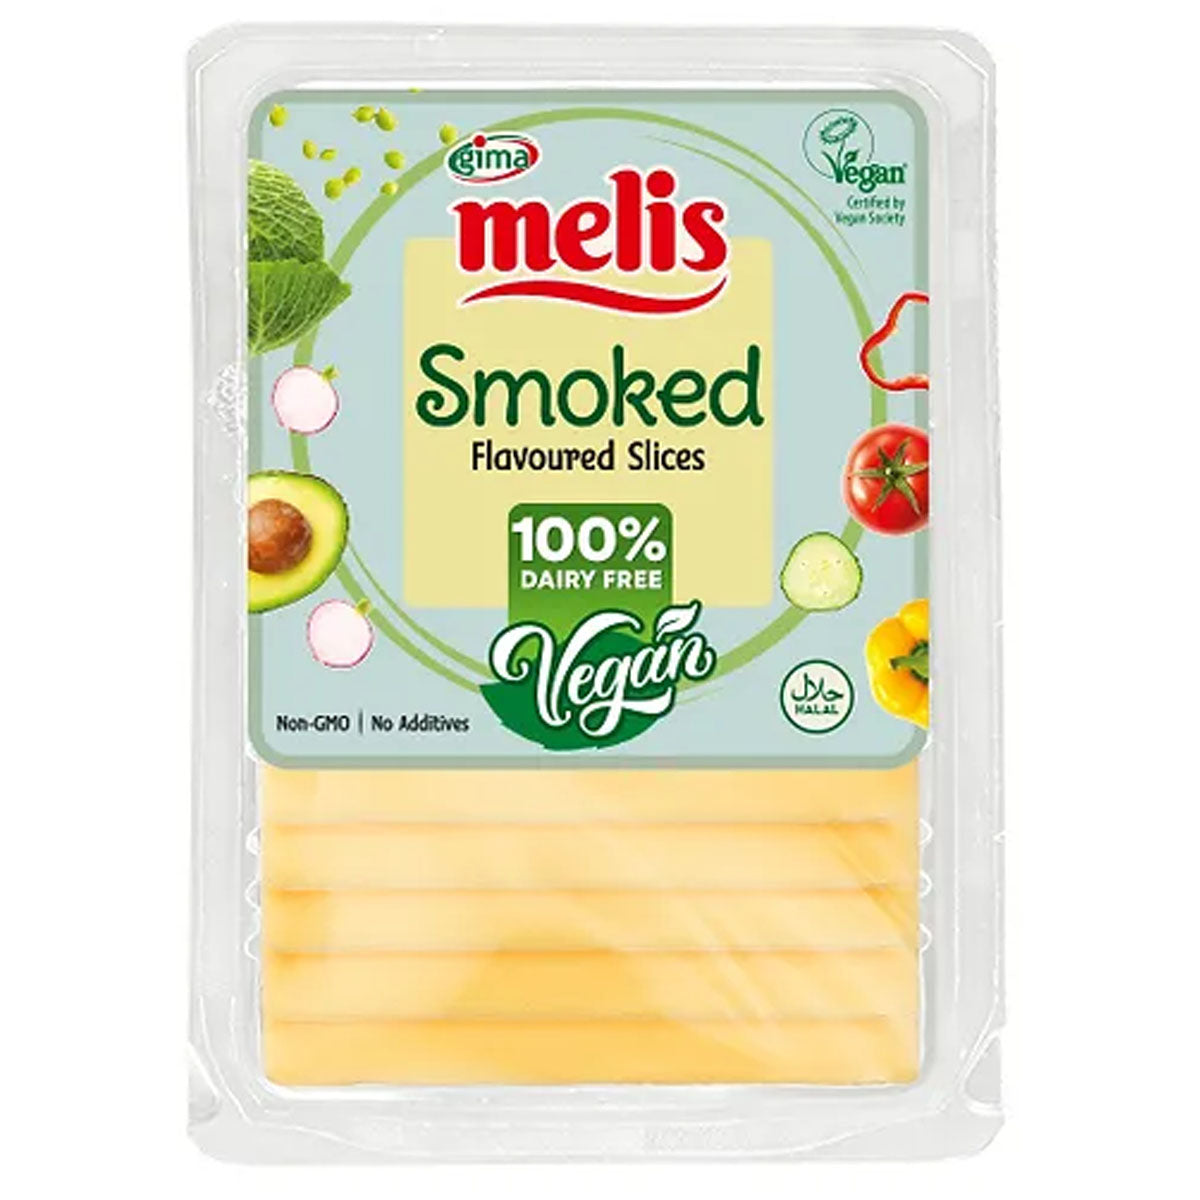 Melis - Vegan Smoked Cheese - 150g in a package.